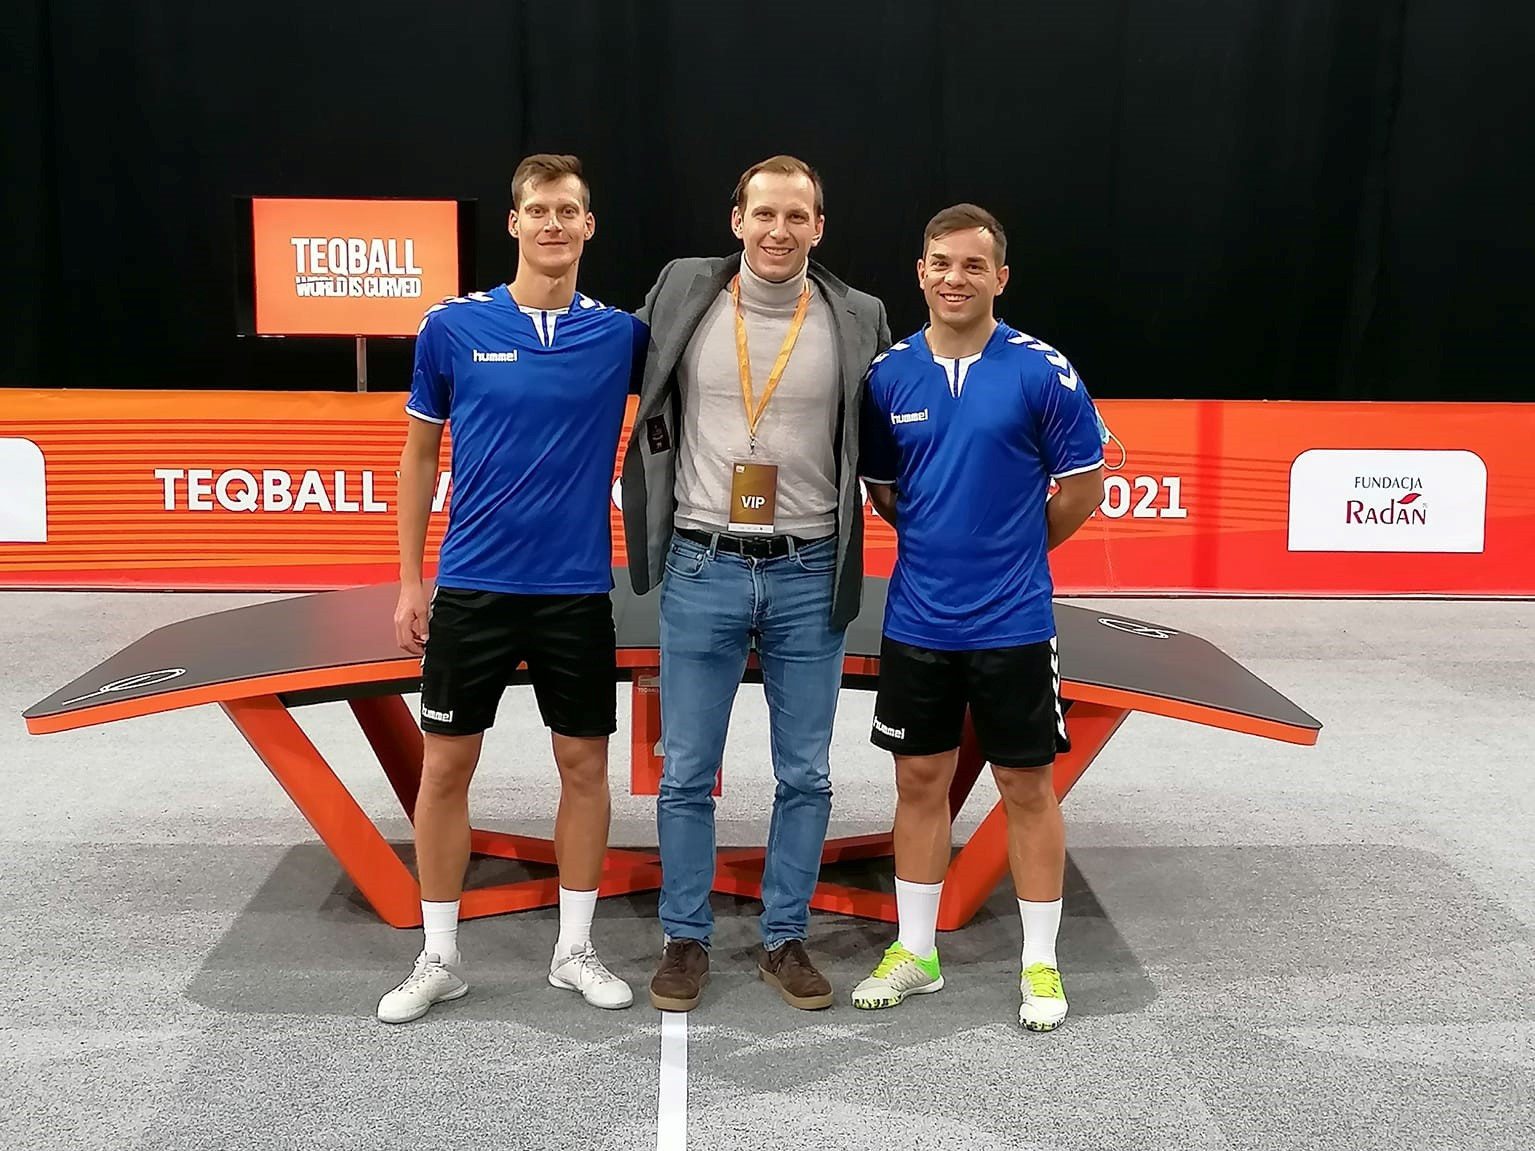 Lithuanian Teqball Federation President President Arnoldas Mauragas, centre, said he was "really proud" of the country's first representatives at the Teqball World Championships ©Lithuanian Teqball Federation